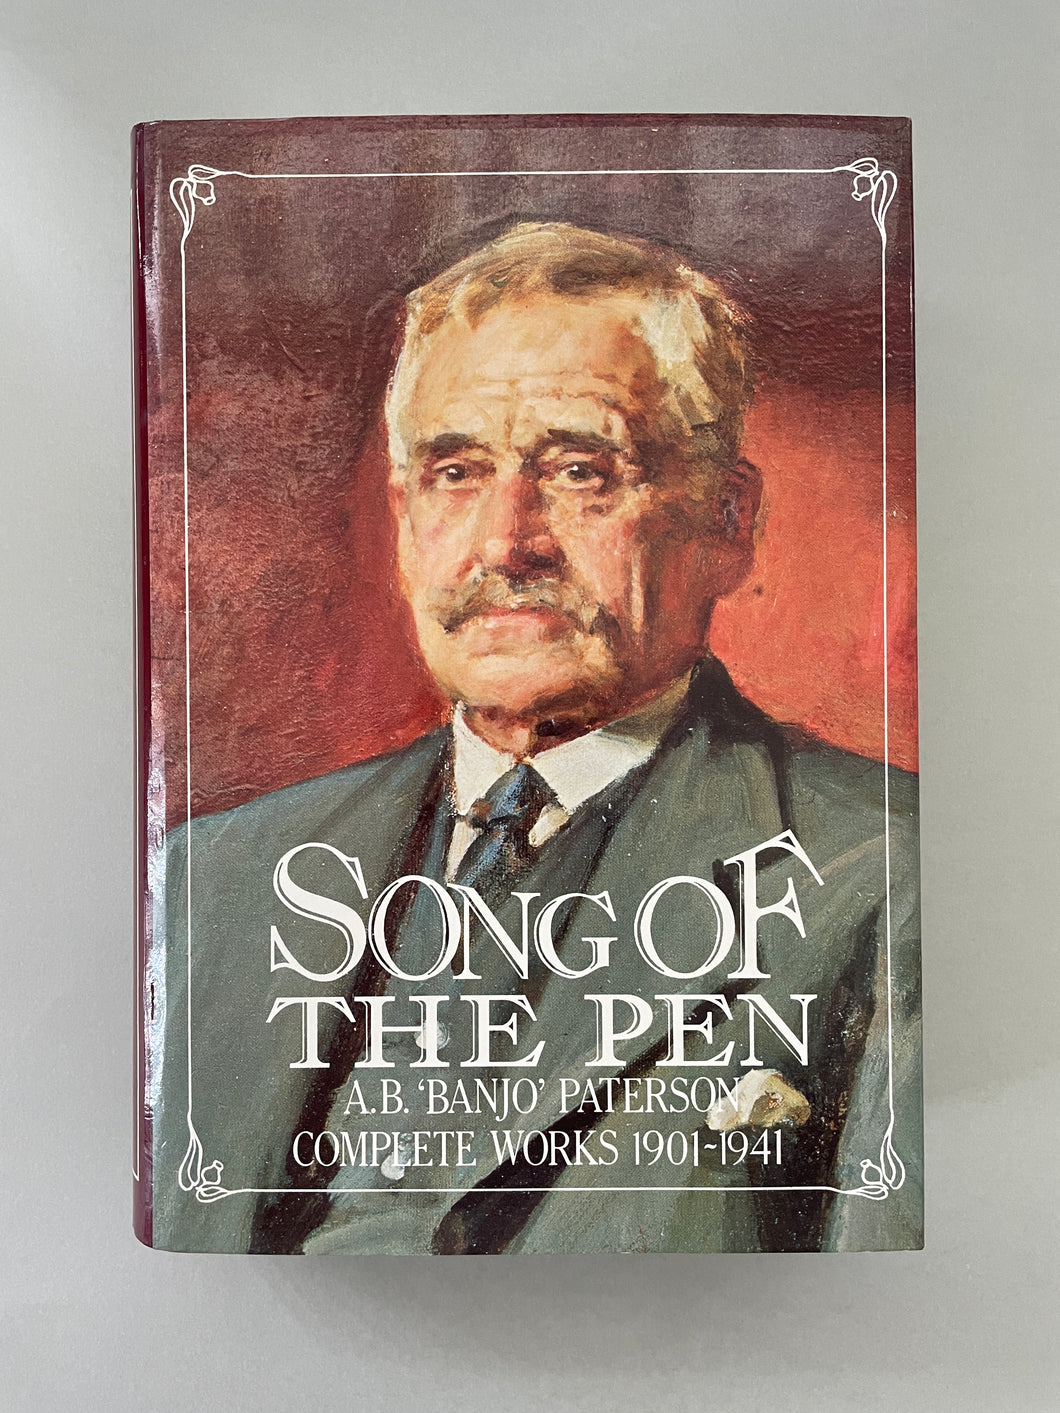 Song of the Pen by Banjo Paterson: photo of the front cover which shows very minor scuff marks along the edges.